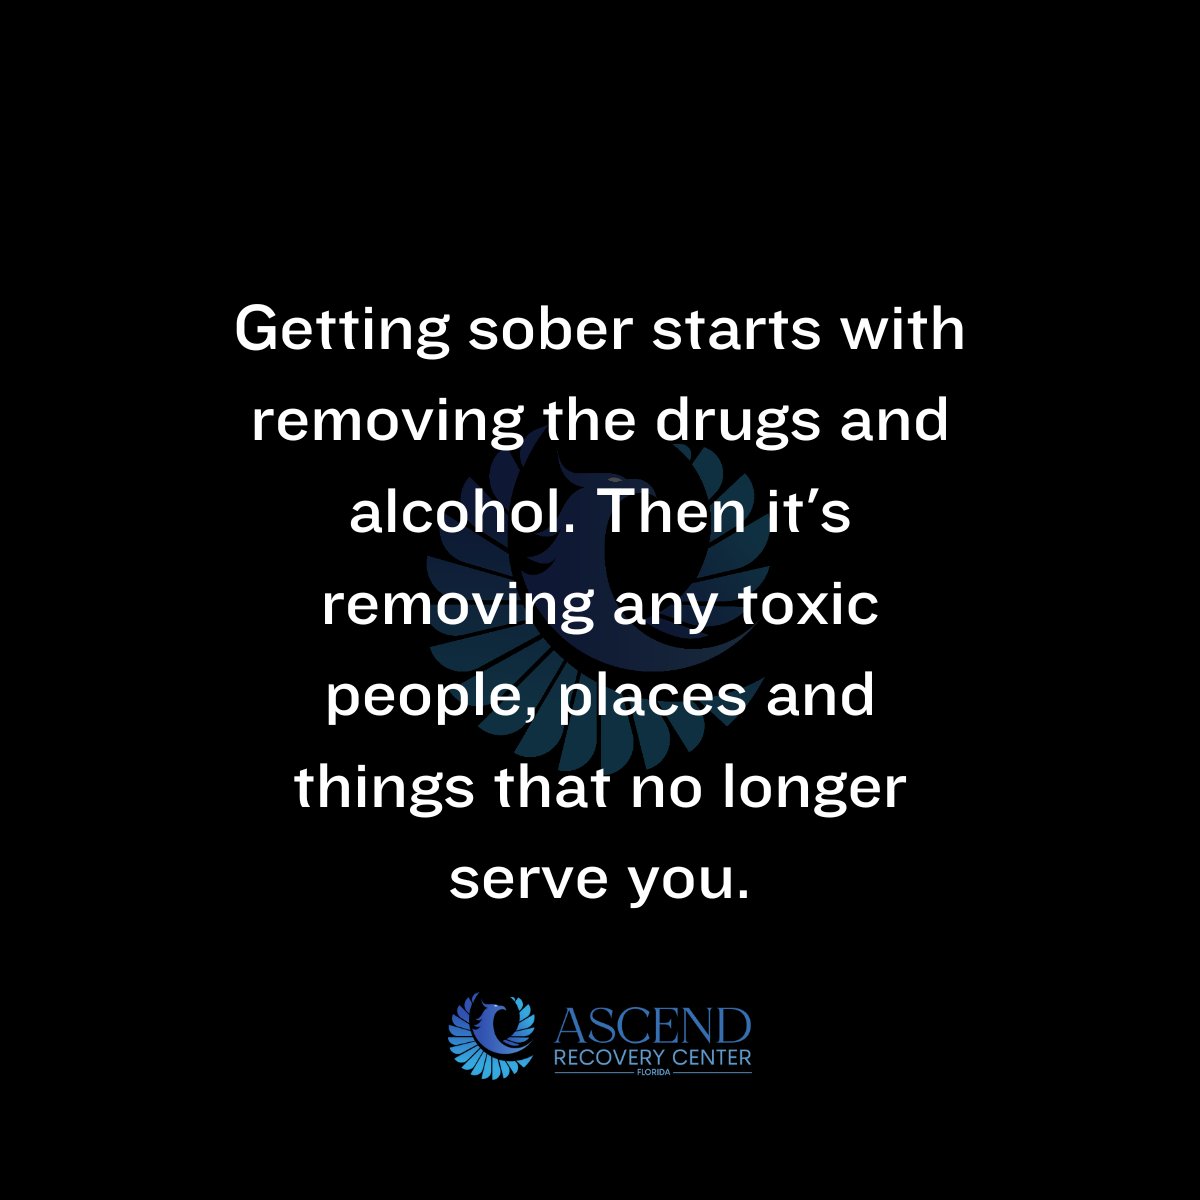 💙💙💙🔥
#soberlifestyle #sober
#recoveryispossible #dothework
#addictionrecovery #treatment #soberliving #soberlife #RecoveryPosse